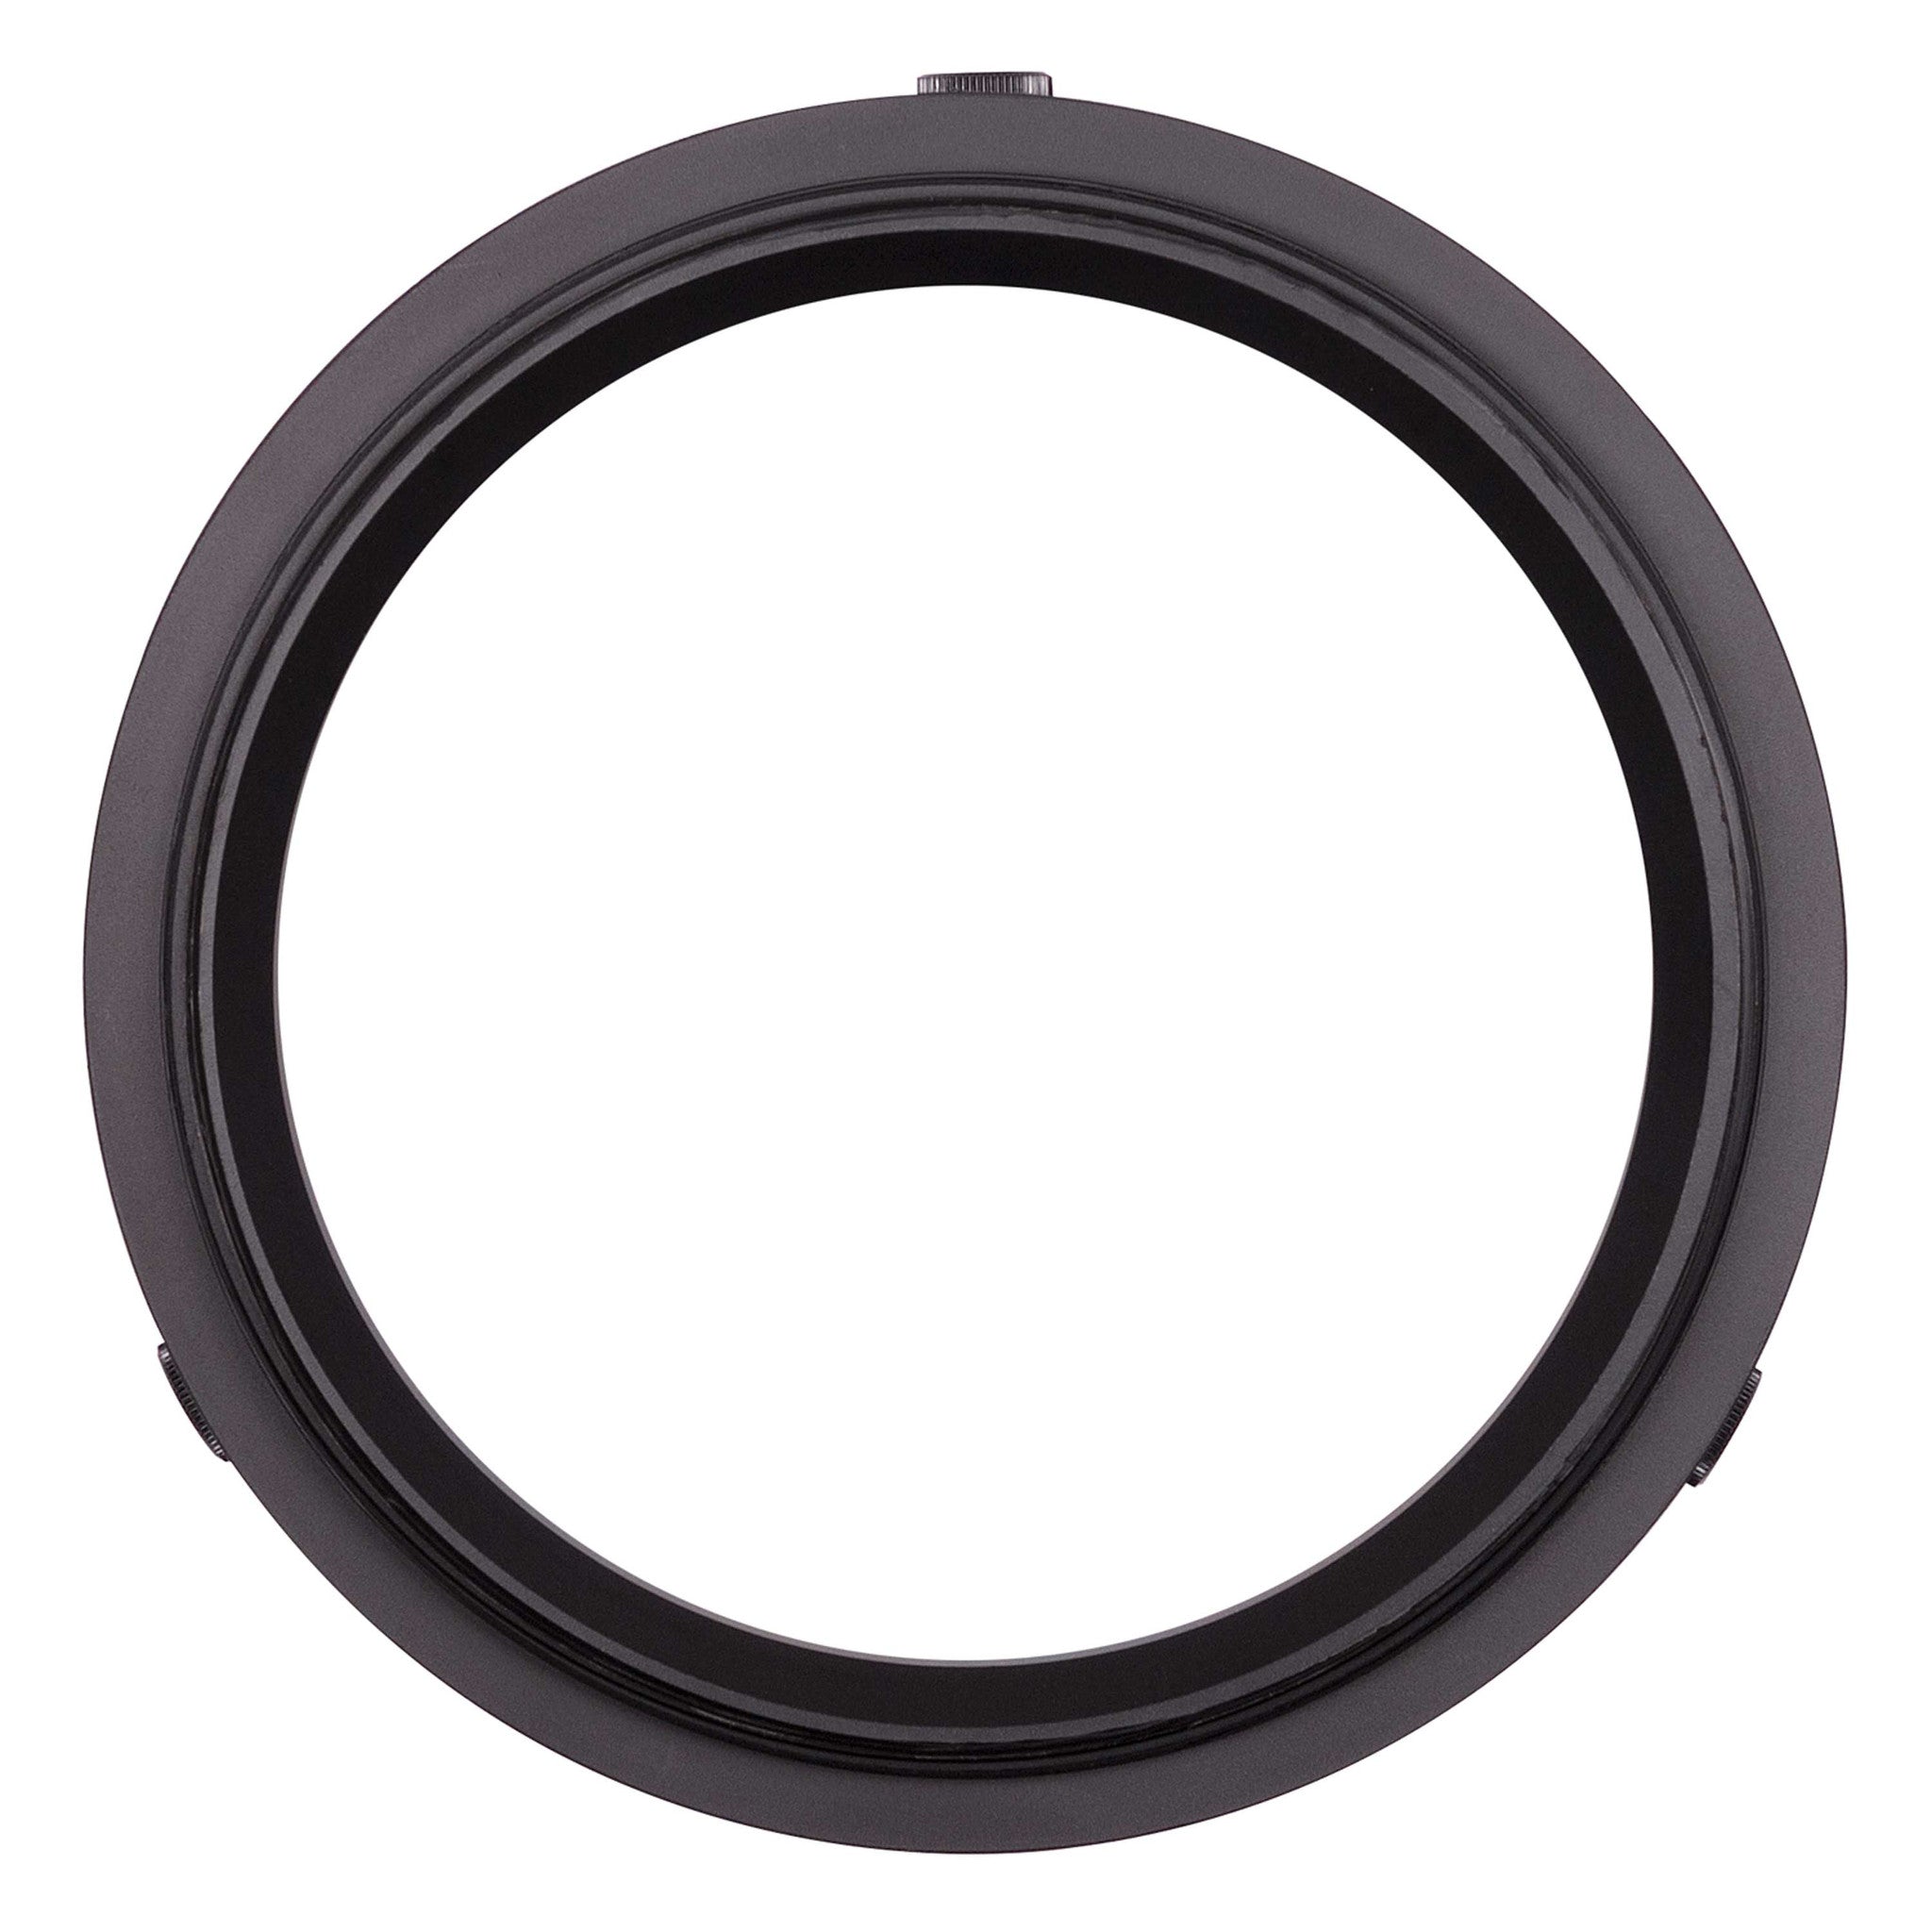 DLM Adapter for Modular 8 inch Dome